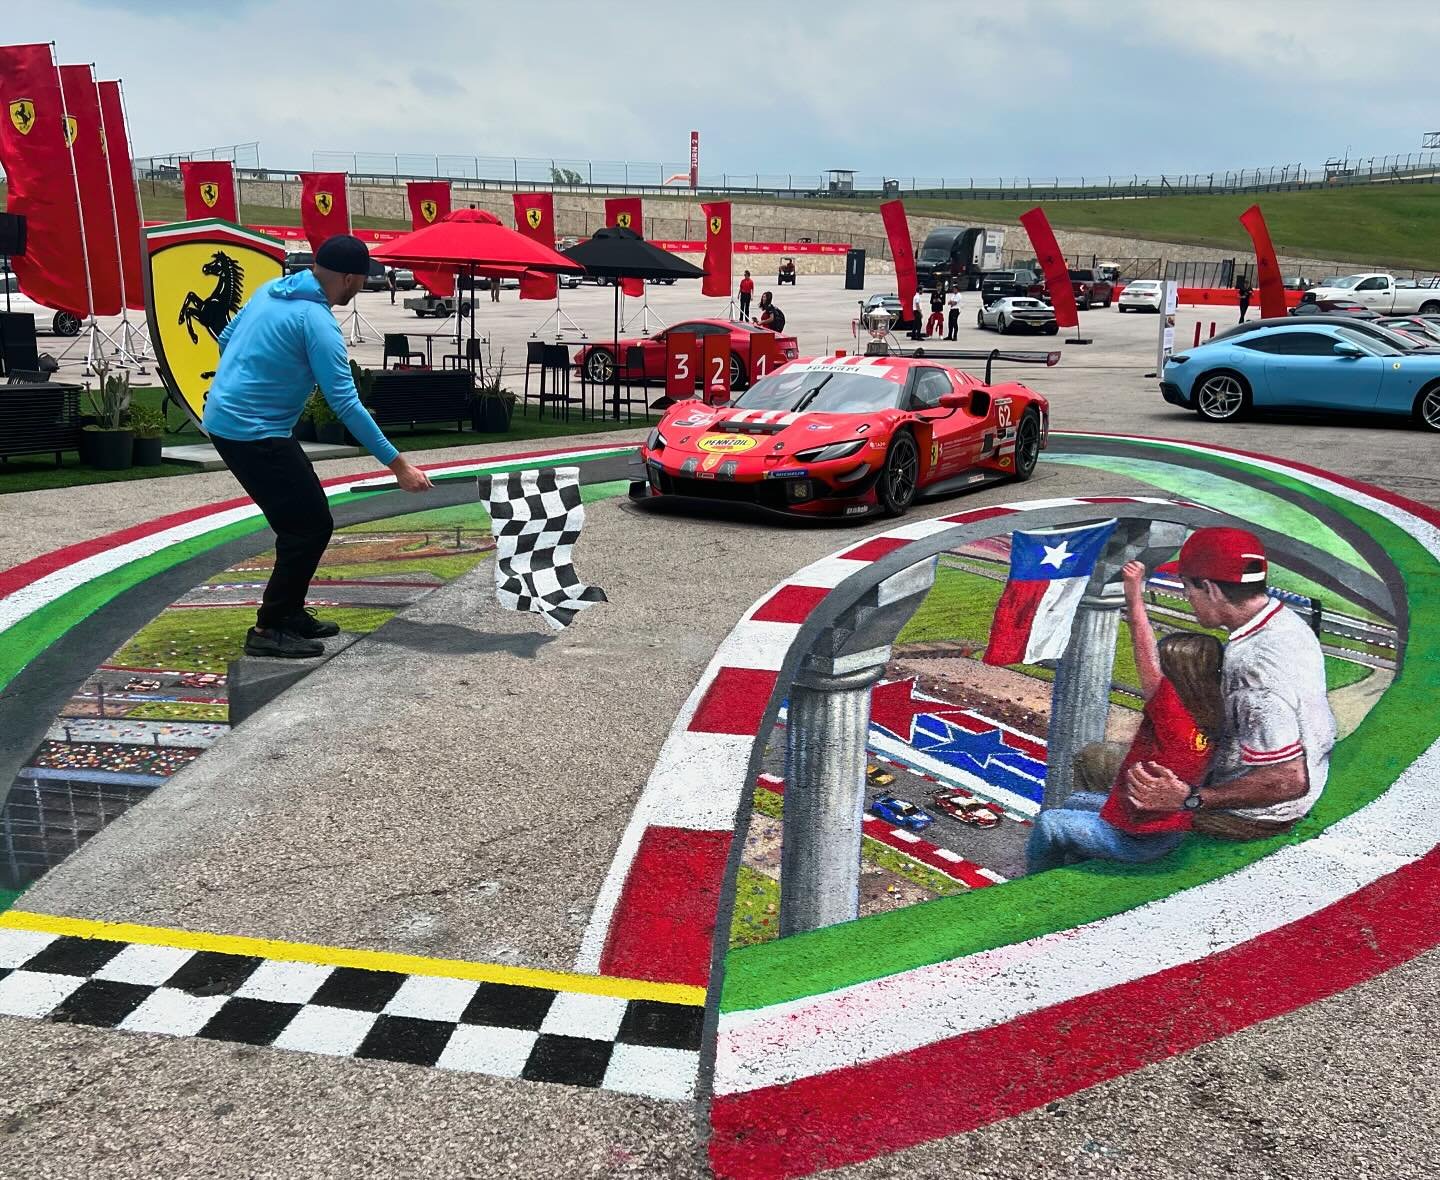 New Ferrari 3D street painting at @cota_official in Austin, TX with @chriscarlsonart! What an amazing world behind the scenes at the Ferrari Challenge that I know very little about. Might be one of my favorite settings for a painting as a car rolls i